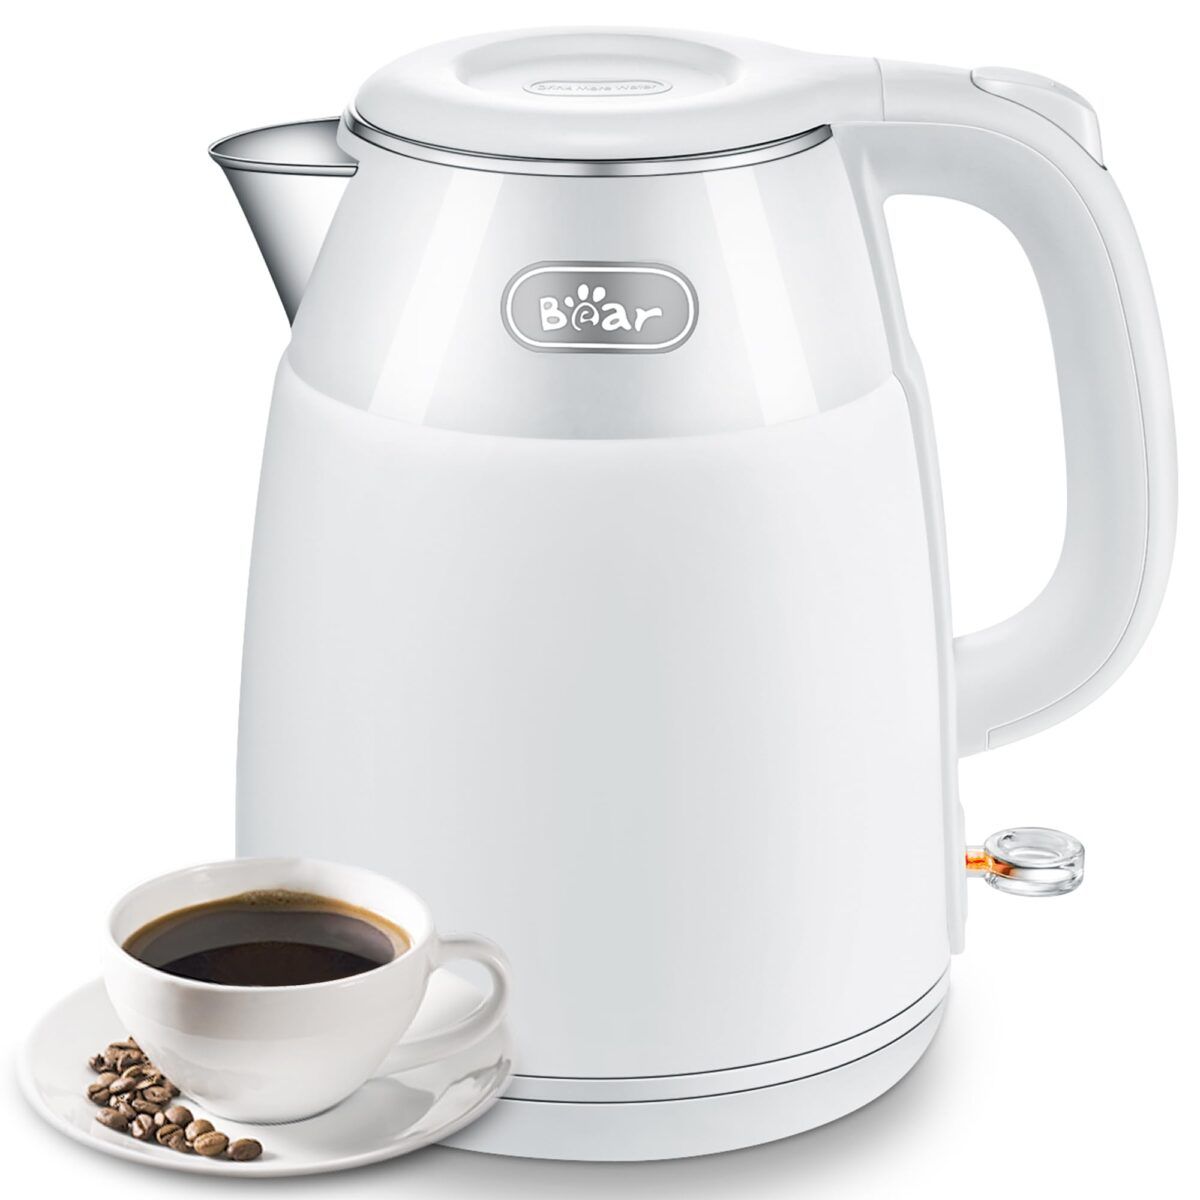 Best Electric Kettle for Tea and Coffee Reviews